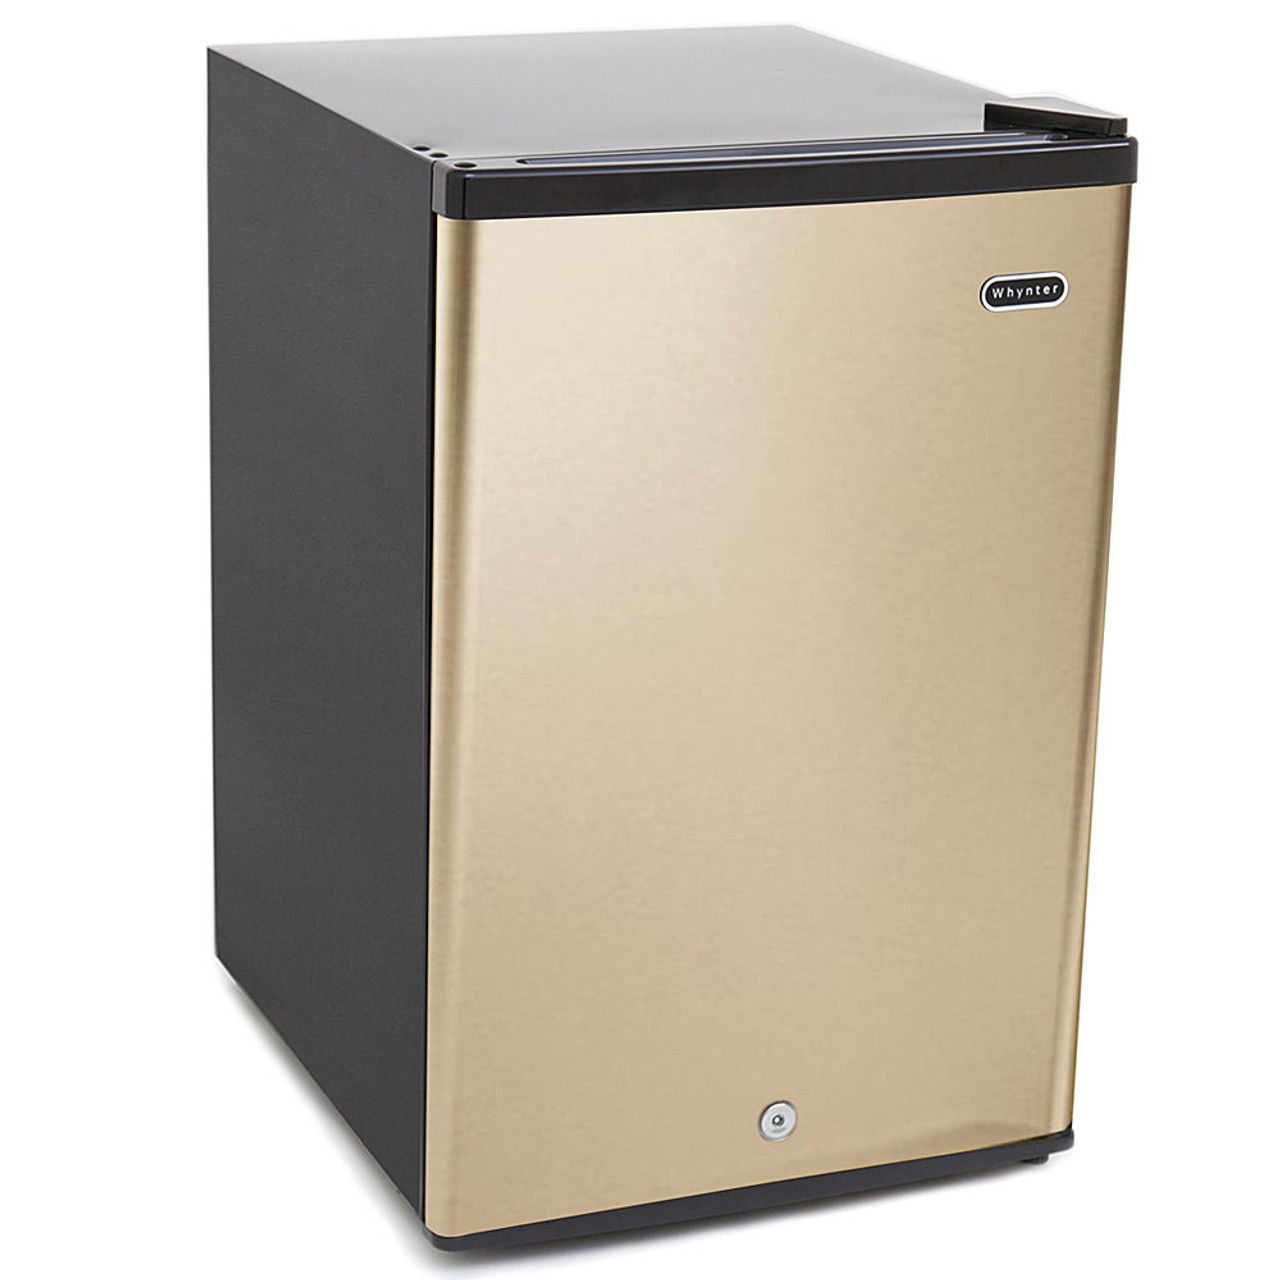 Whynter 2.1 cu.ft Energy Star Upright Freezer with Lock in Rose Gold